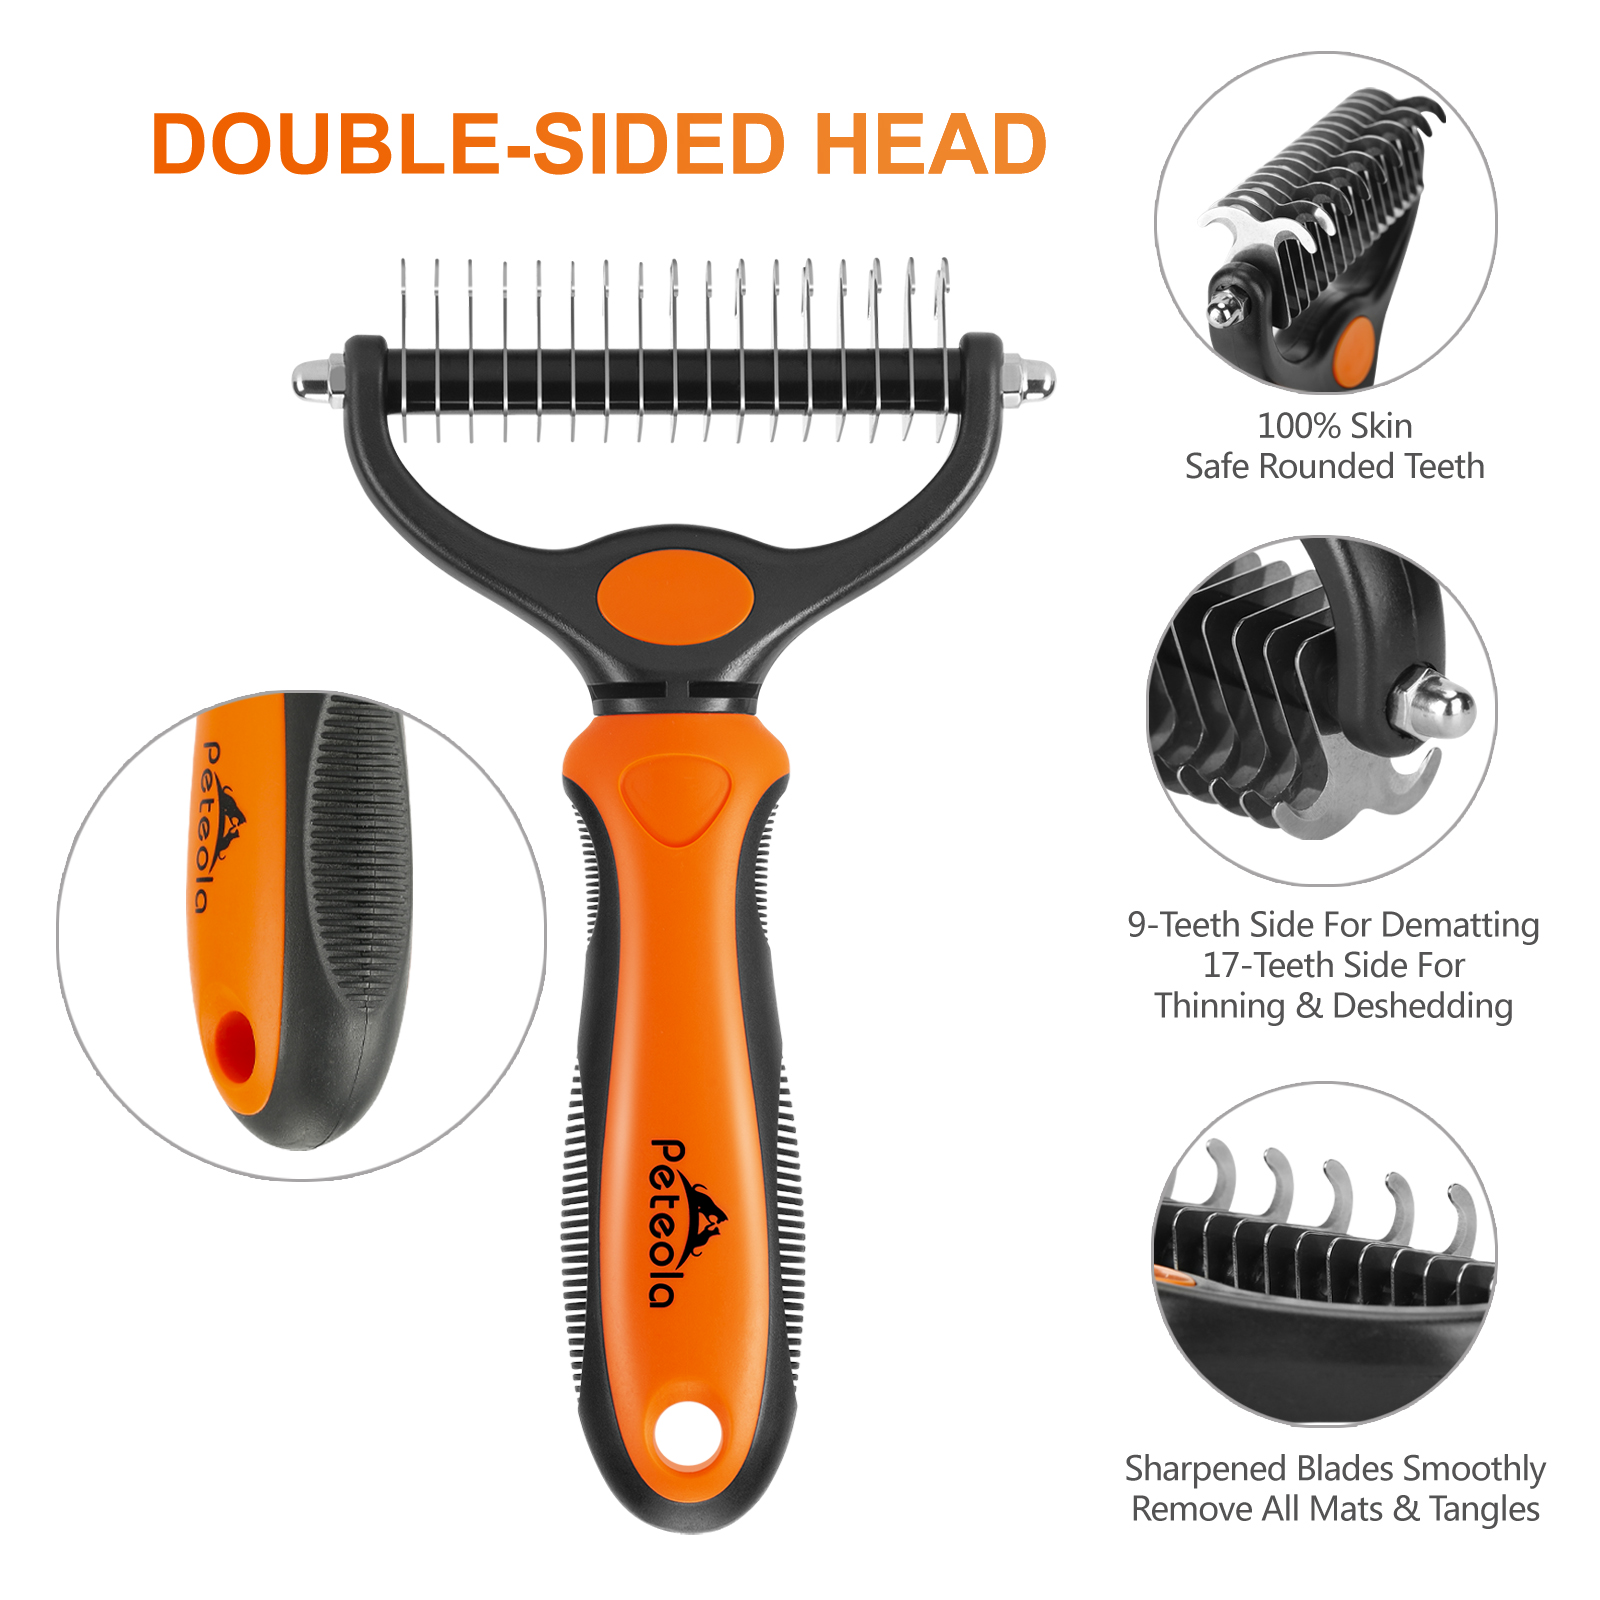 WXQKD Pet Carding Machine,Pet Grooming Tool No More Nasty Shedding 2 Sided Undercoat Rake for Cats & Dogs,Safe Dematting Comb for Easy Mats & Tangles Removing